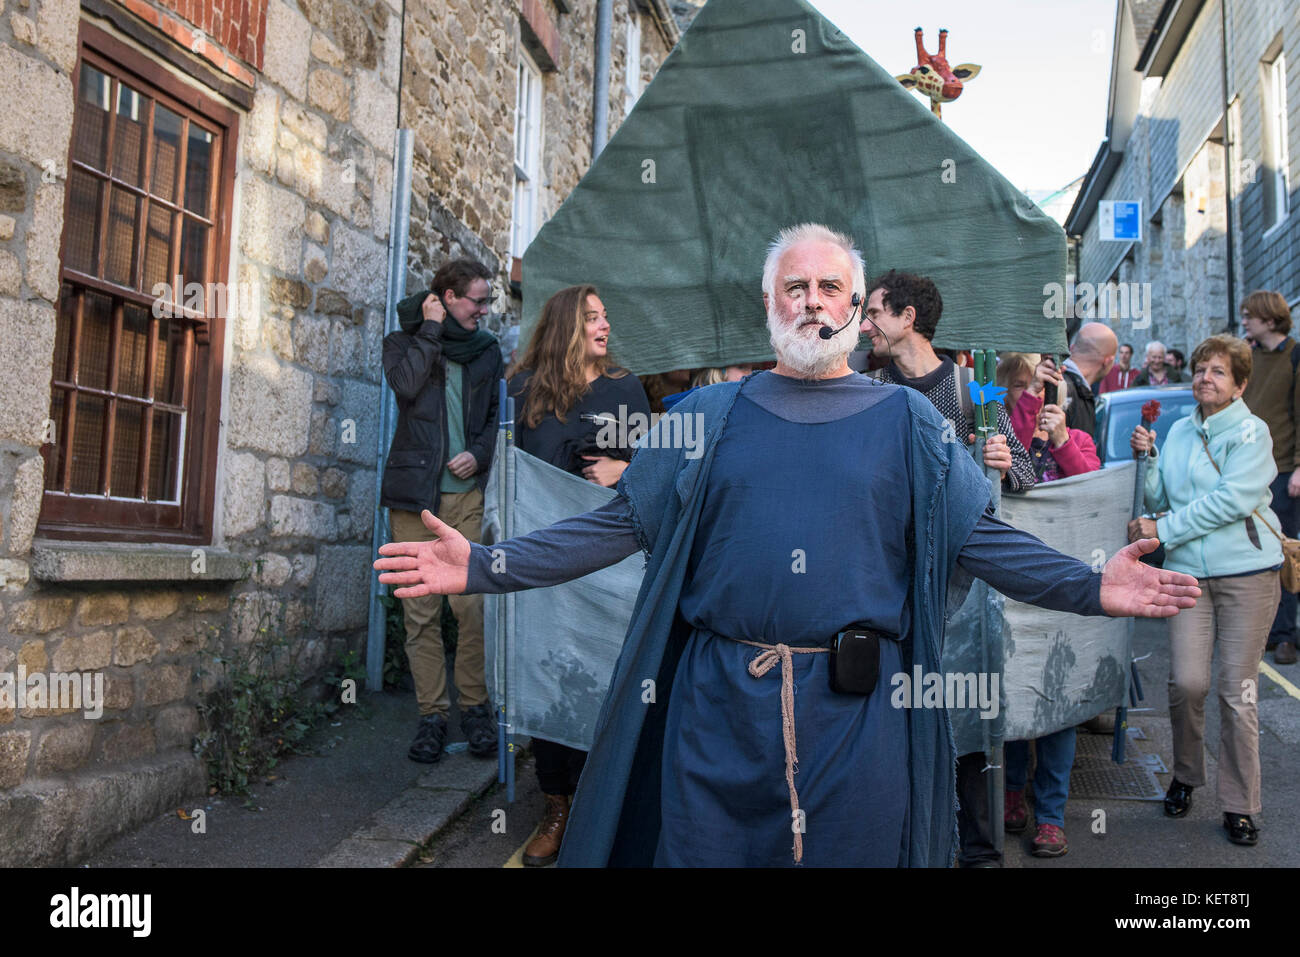 The Ordinalia - Cornish Mystery Plays performed during the Penryn Kemeneth a two day heritage festival at Penryn Cornwall. Stock Photo